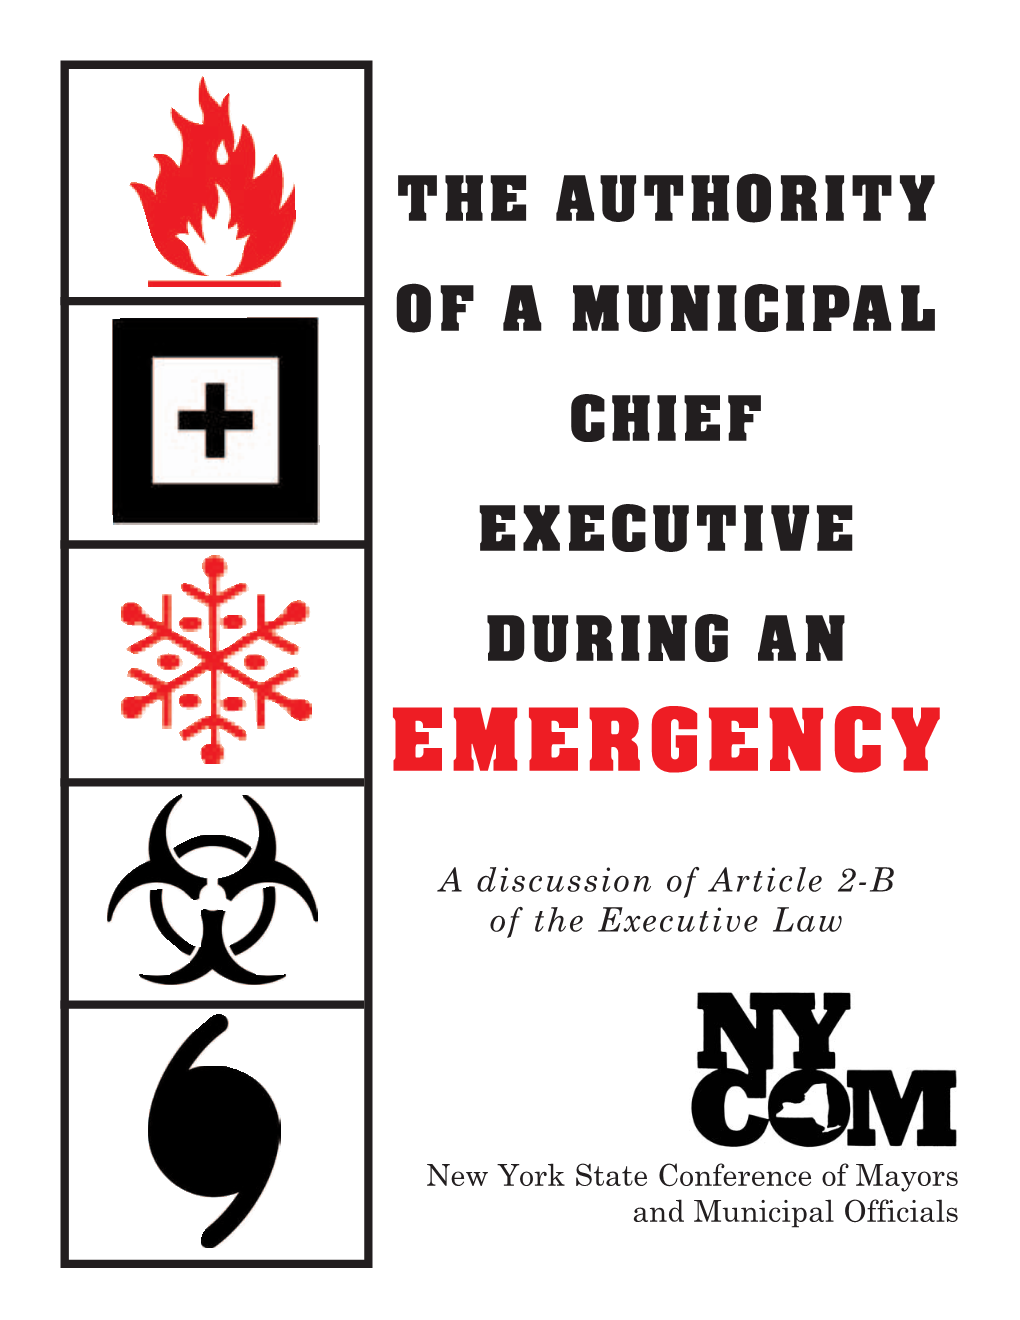 Authority of Municipal Chief Executive During an Emergency